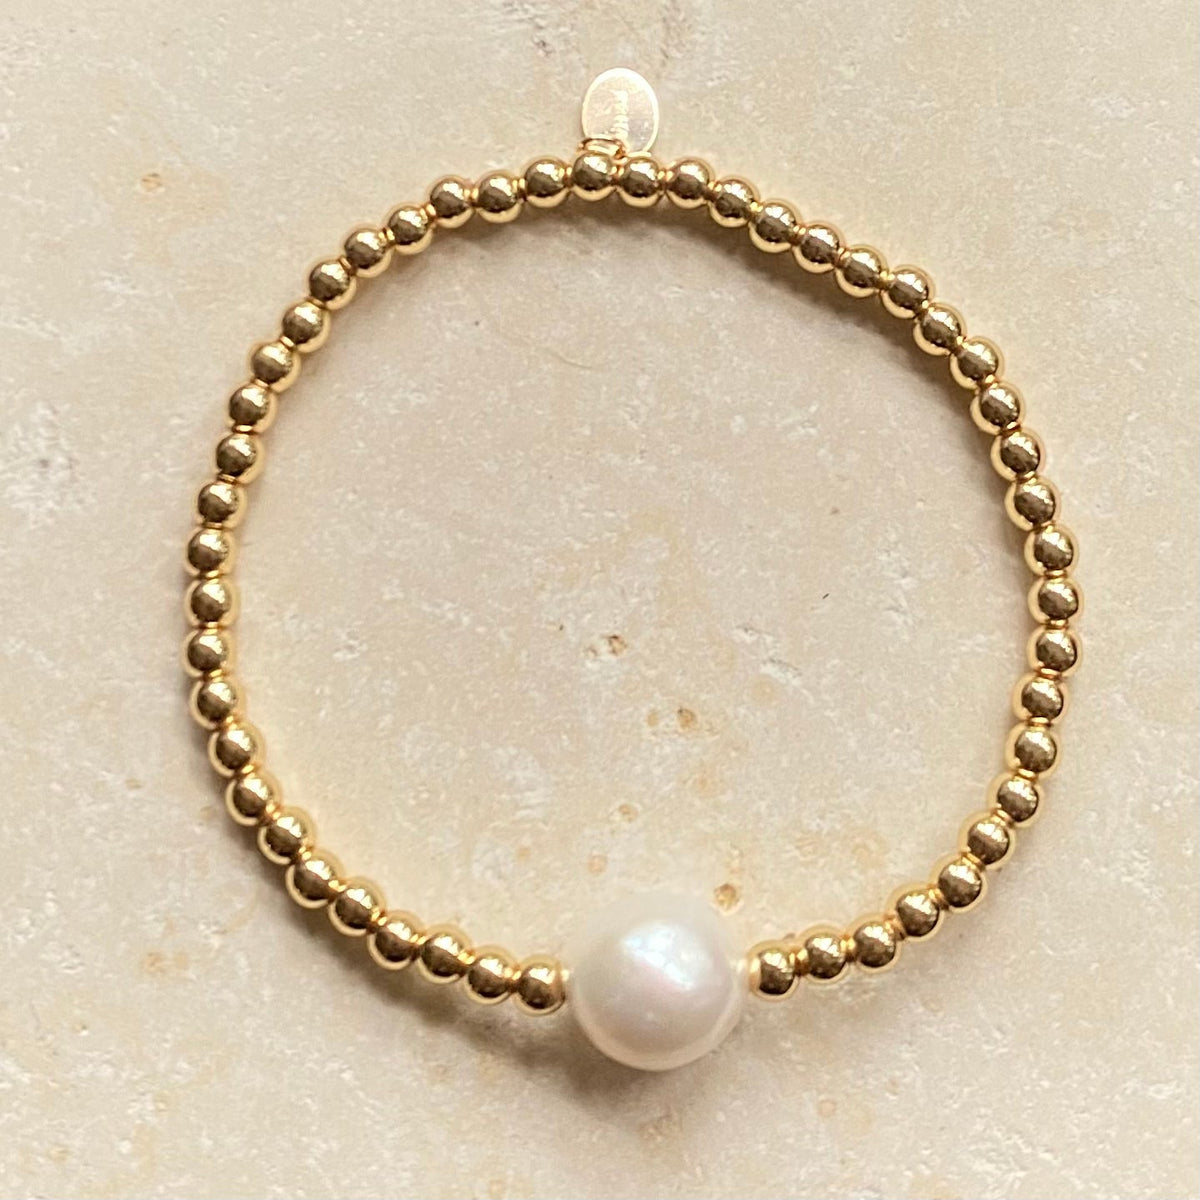 14k gold filled beads bracelet with freshwater baroque pearl